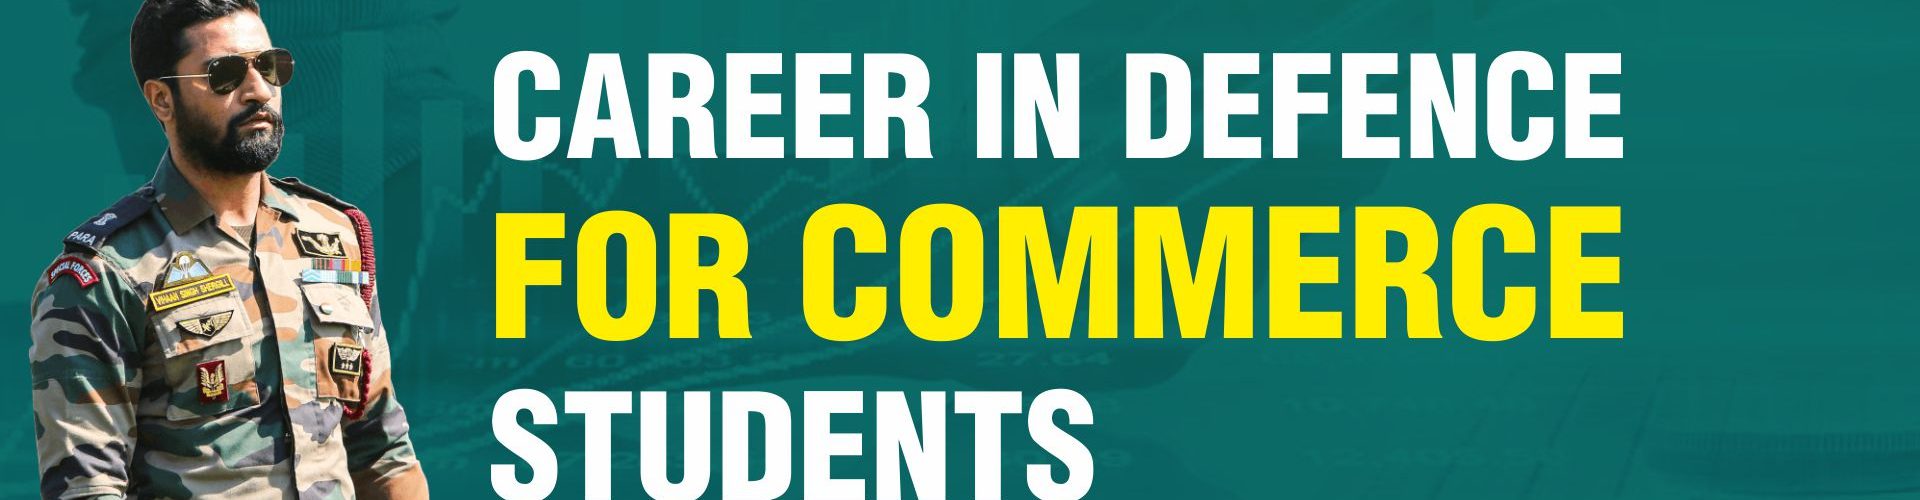 Career in Defence for Commerce students